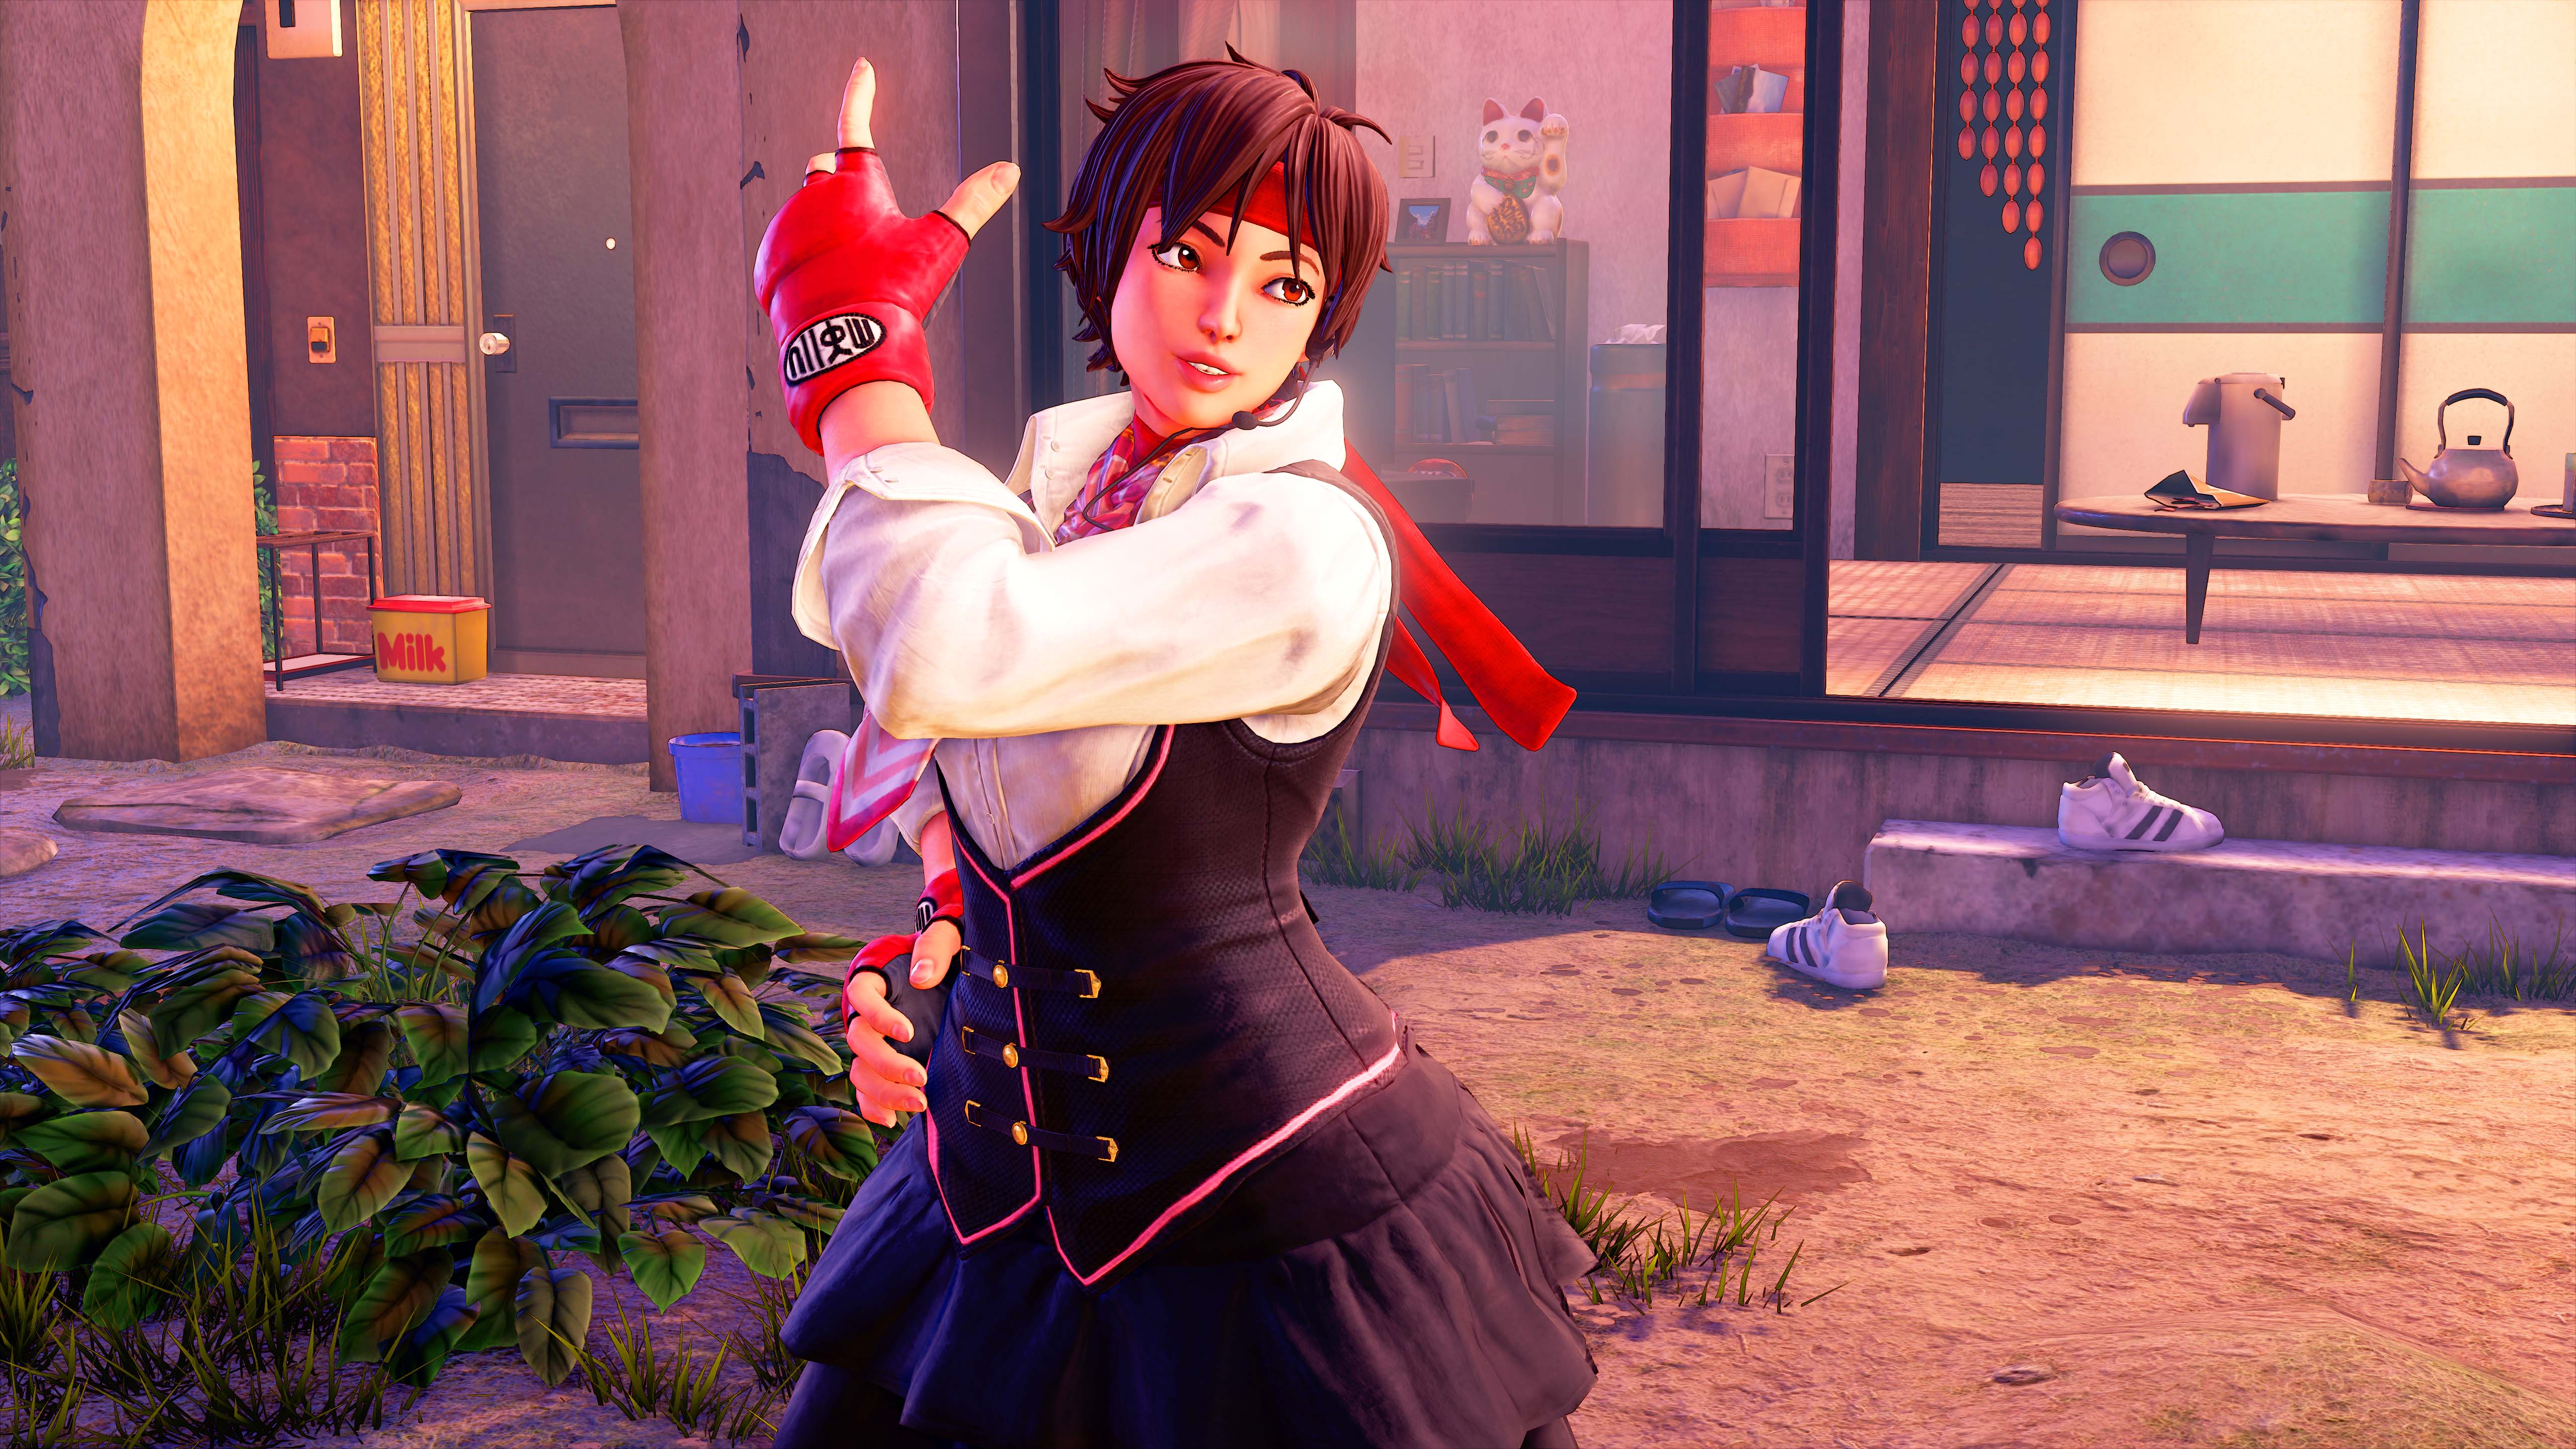 March update trailer for Street Fighter V Champion Edition revealed